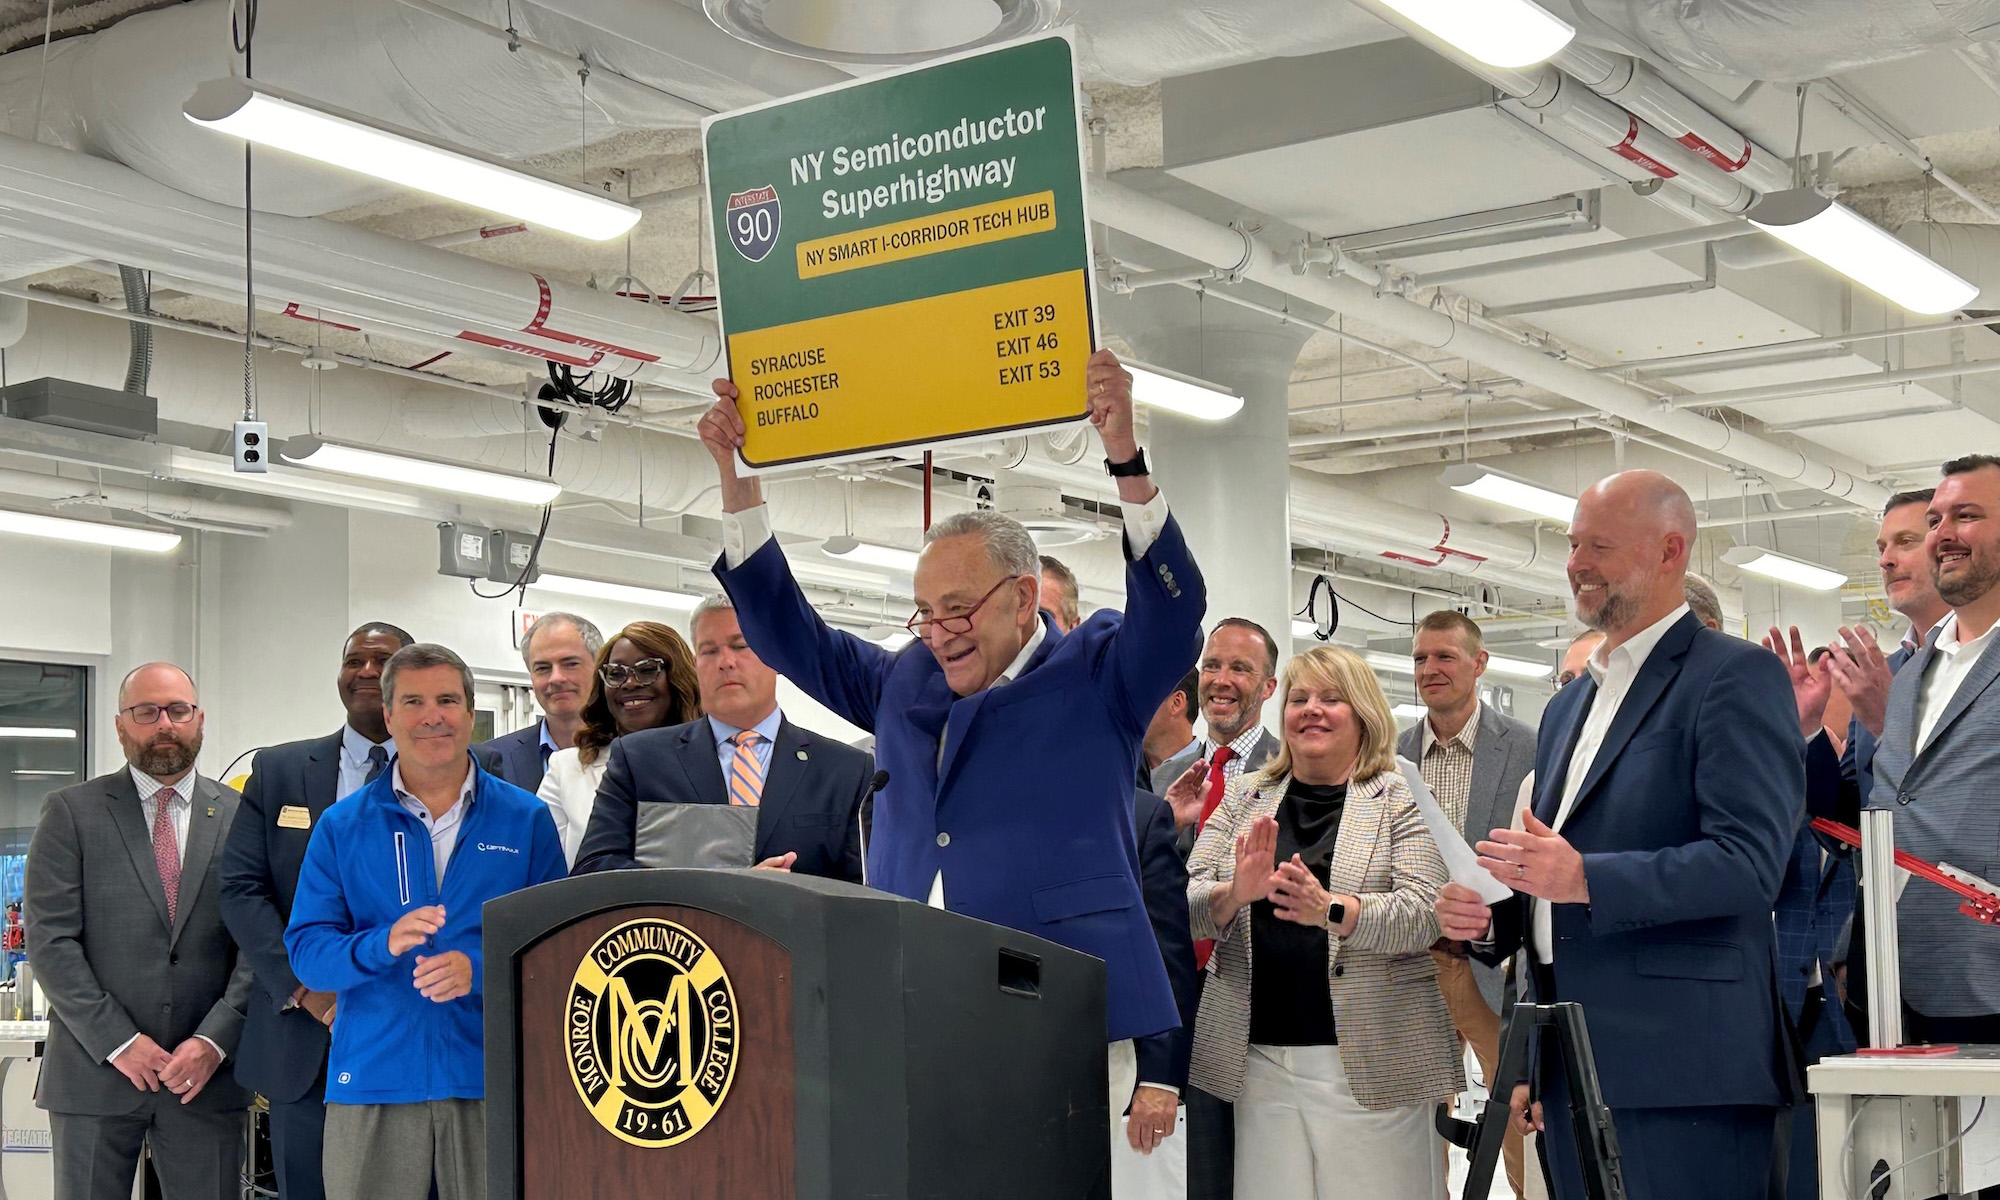 Senator Schumer, in front of other leaders, holds sign that says Route 90, "NY Semiconductor Superhighway."